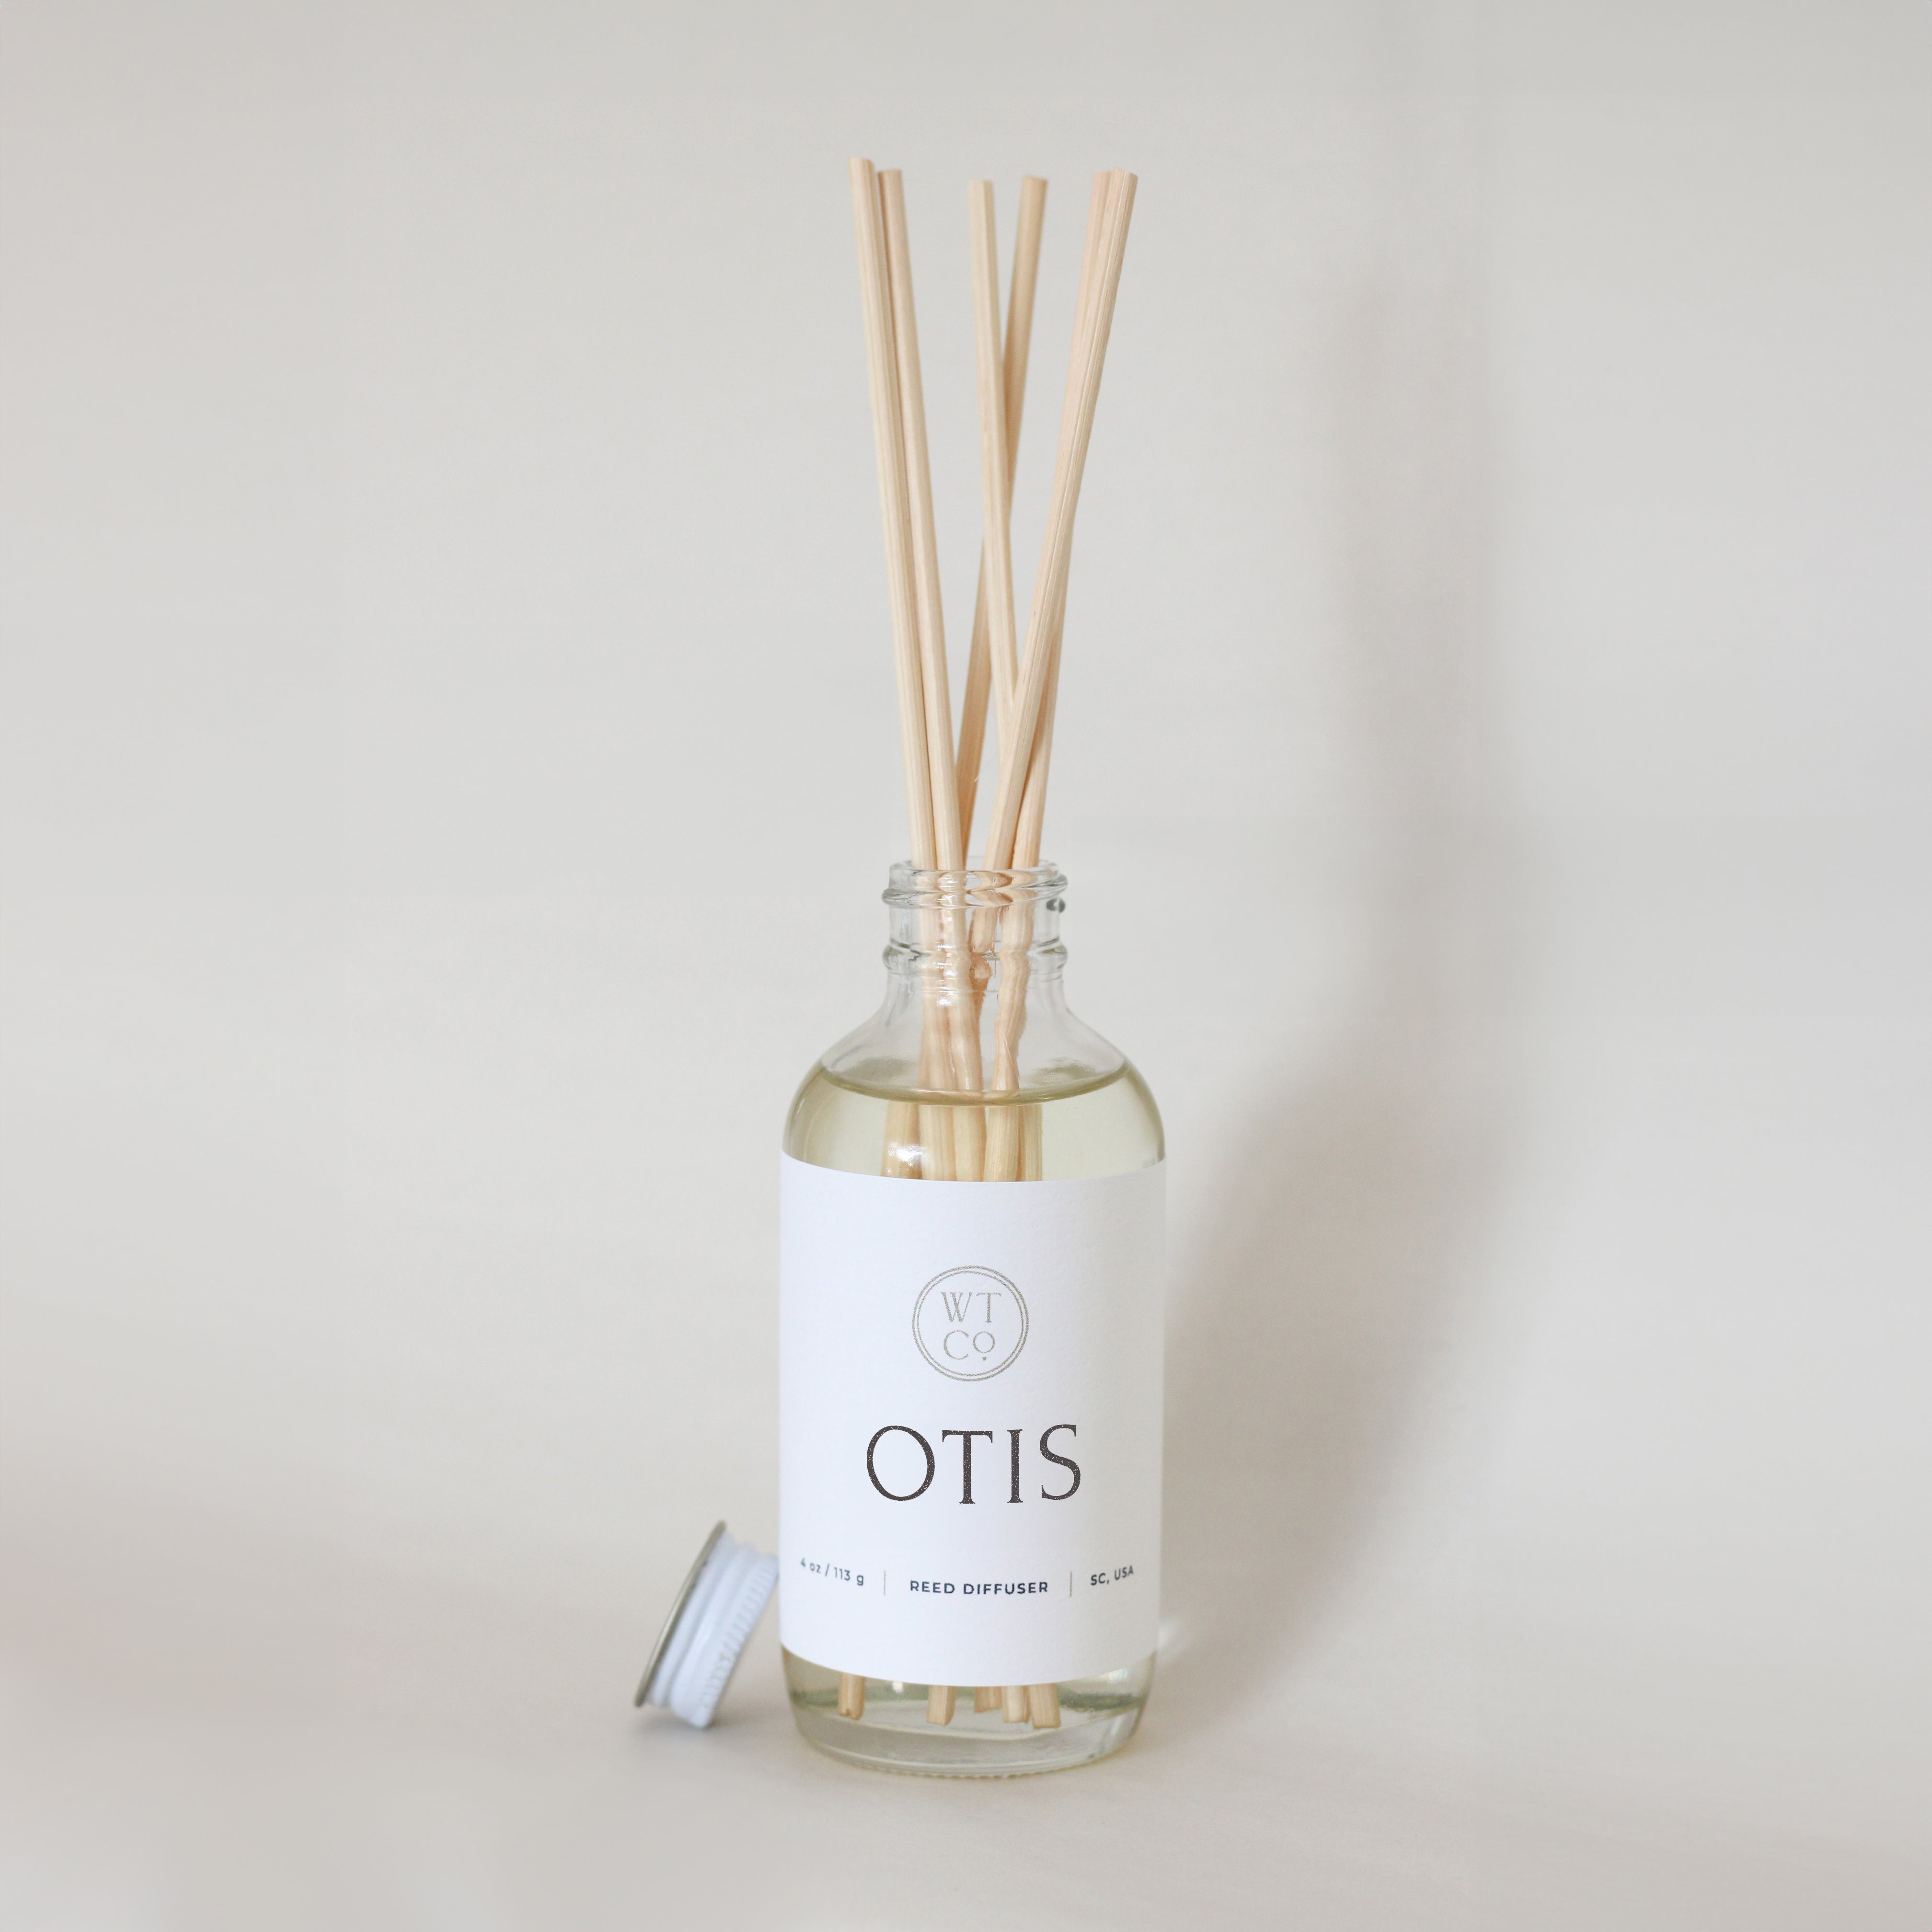 Otis Reed Diffuser | Well-Taylored Co.